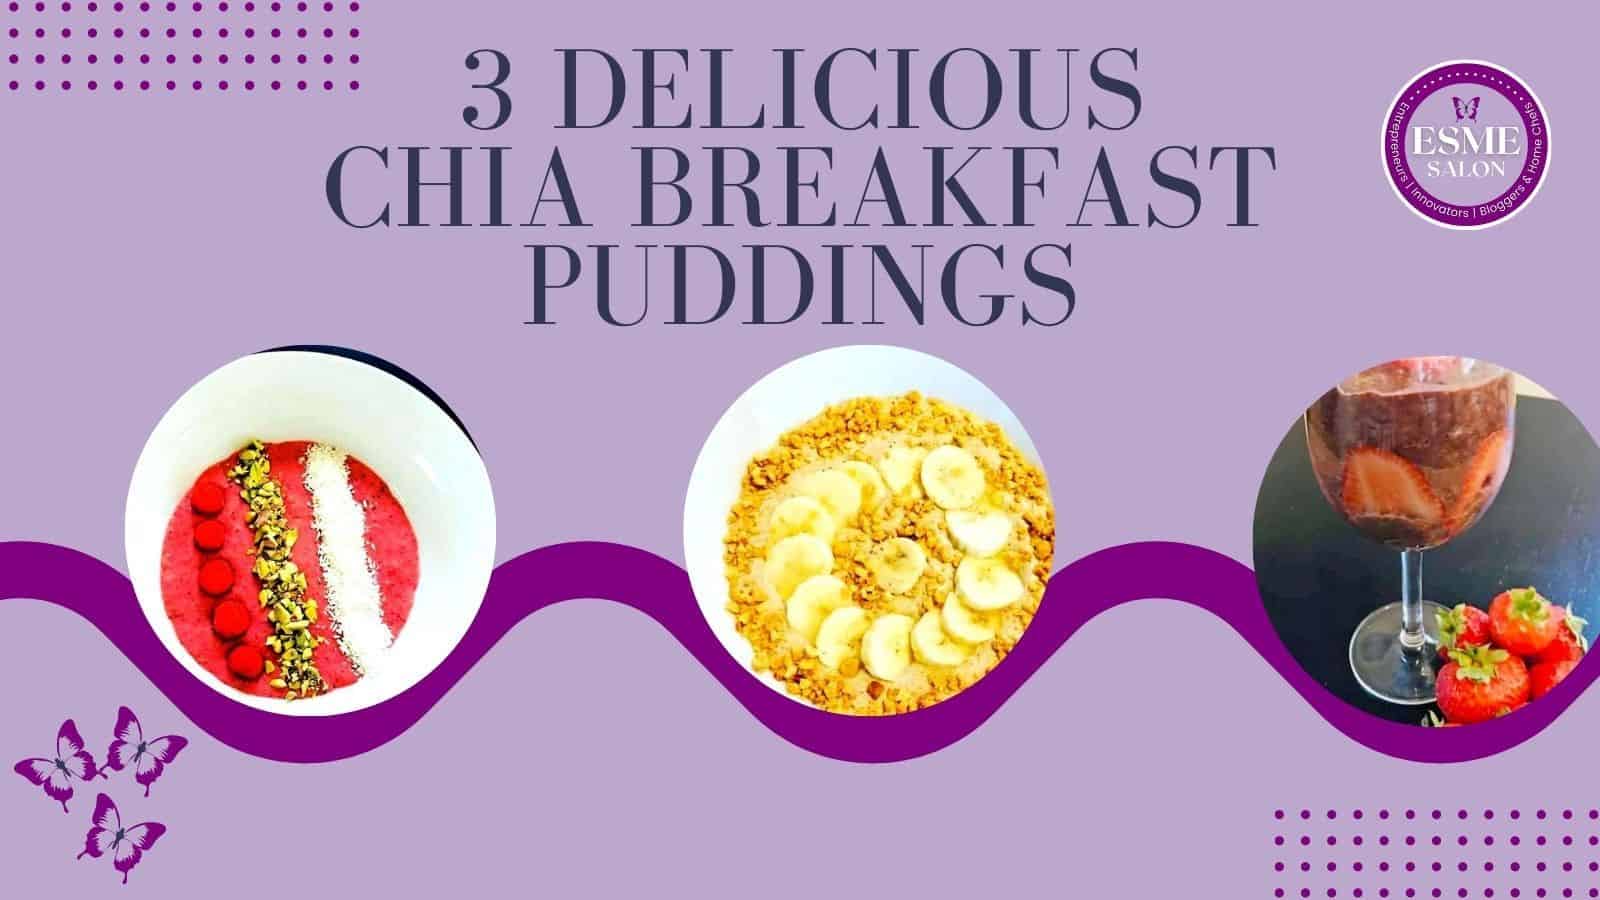 3 bowls Chia Breakfast Puddings, one with strawberries, one with banana and one with pepitas and raspberries